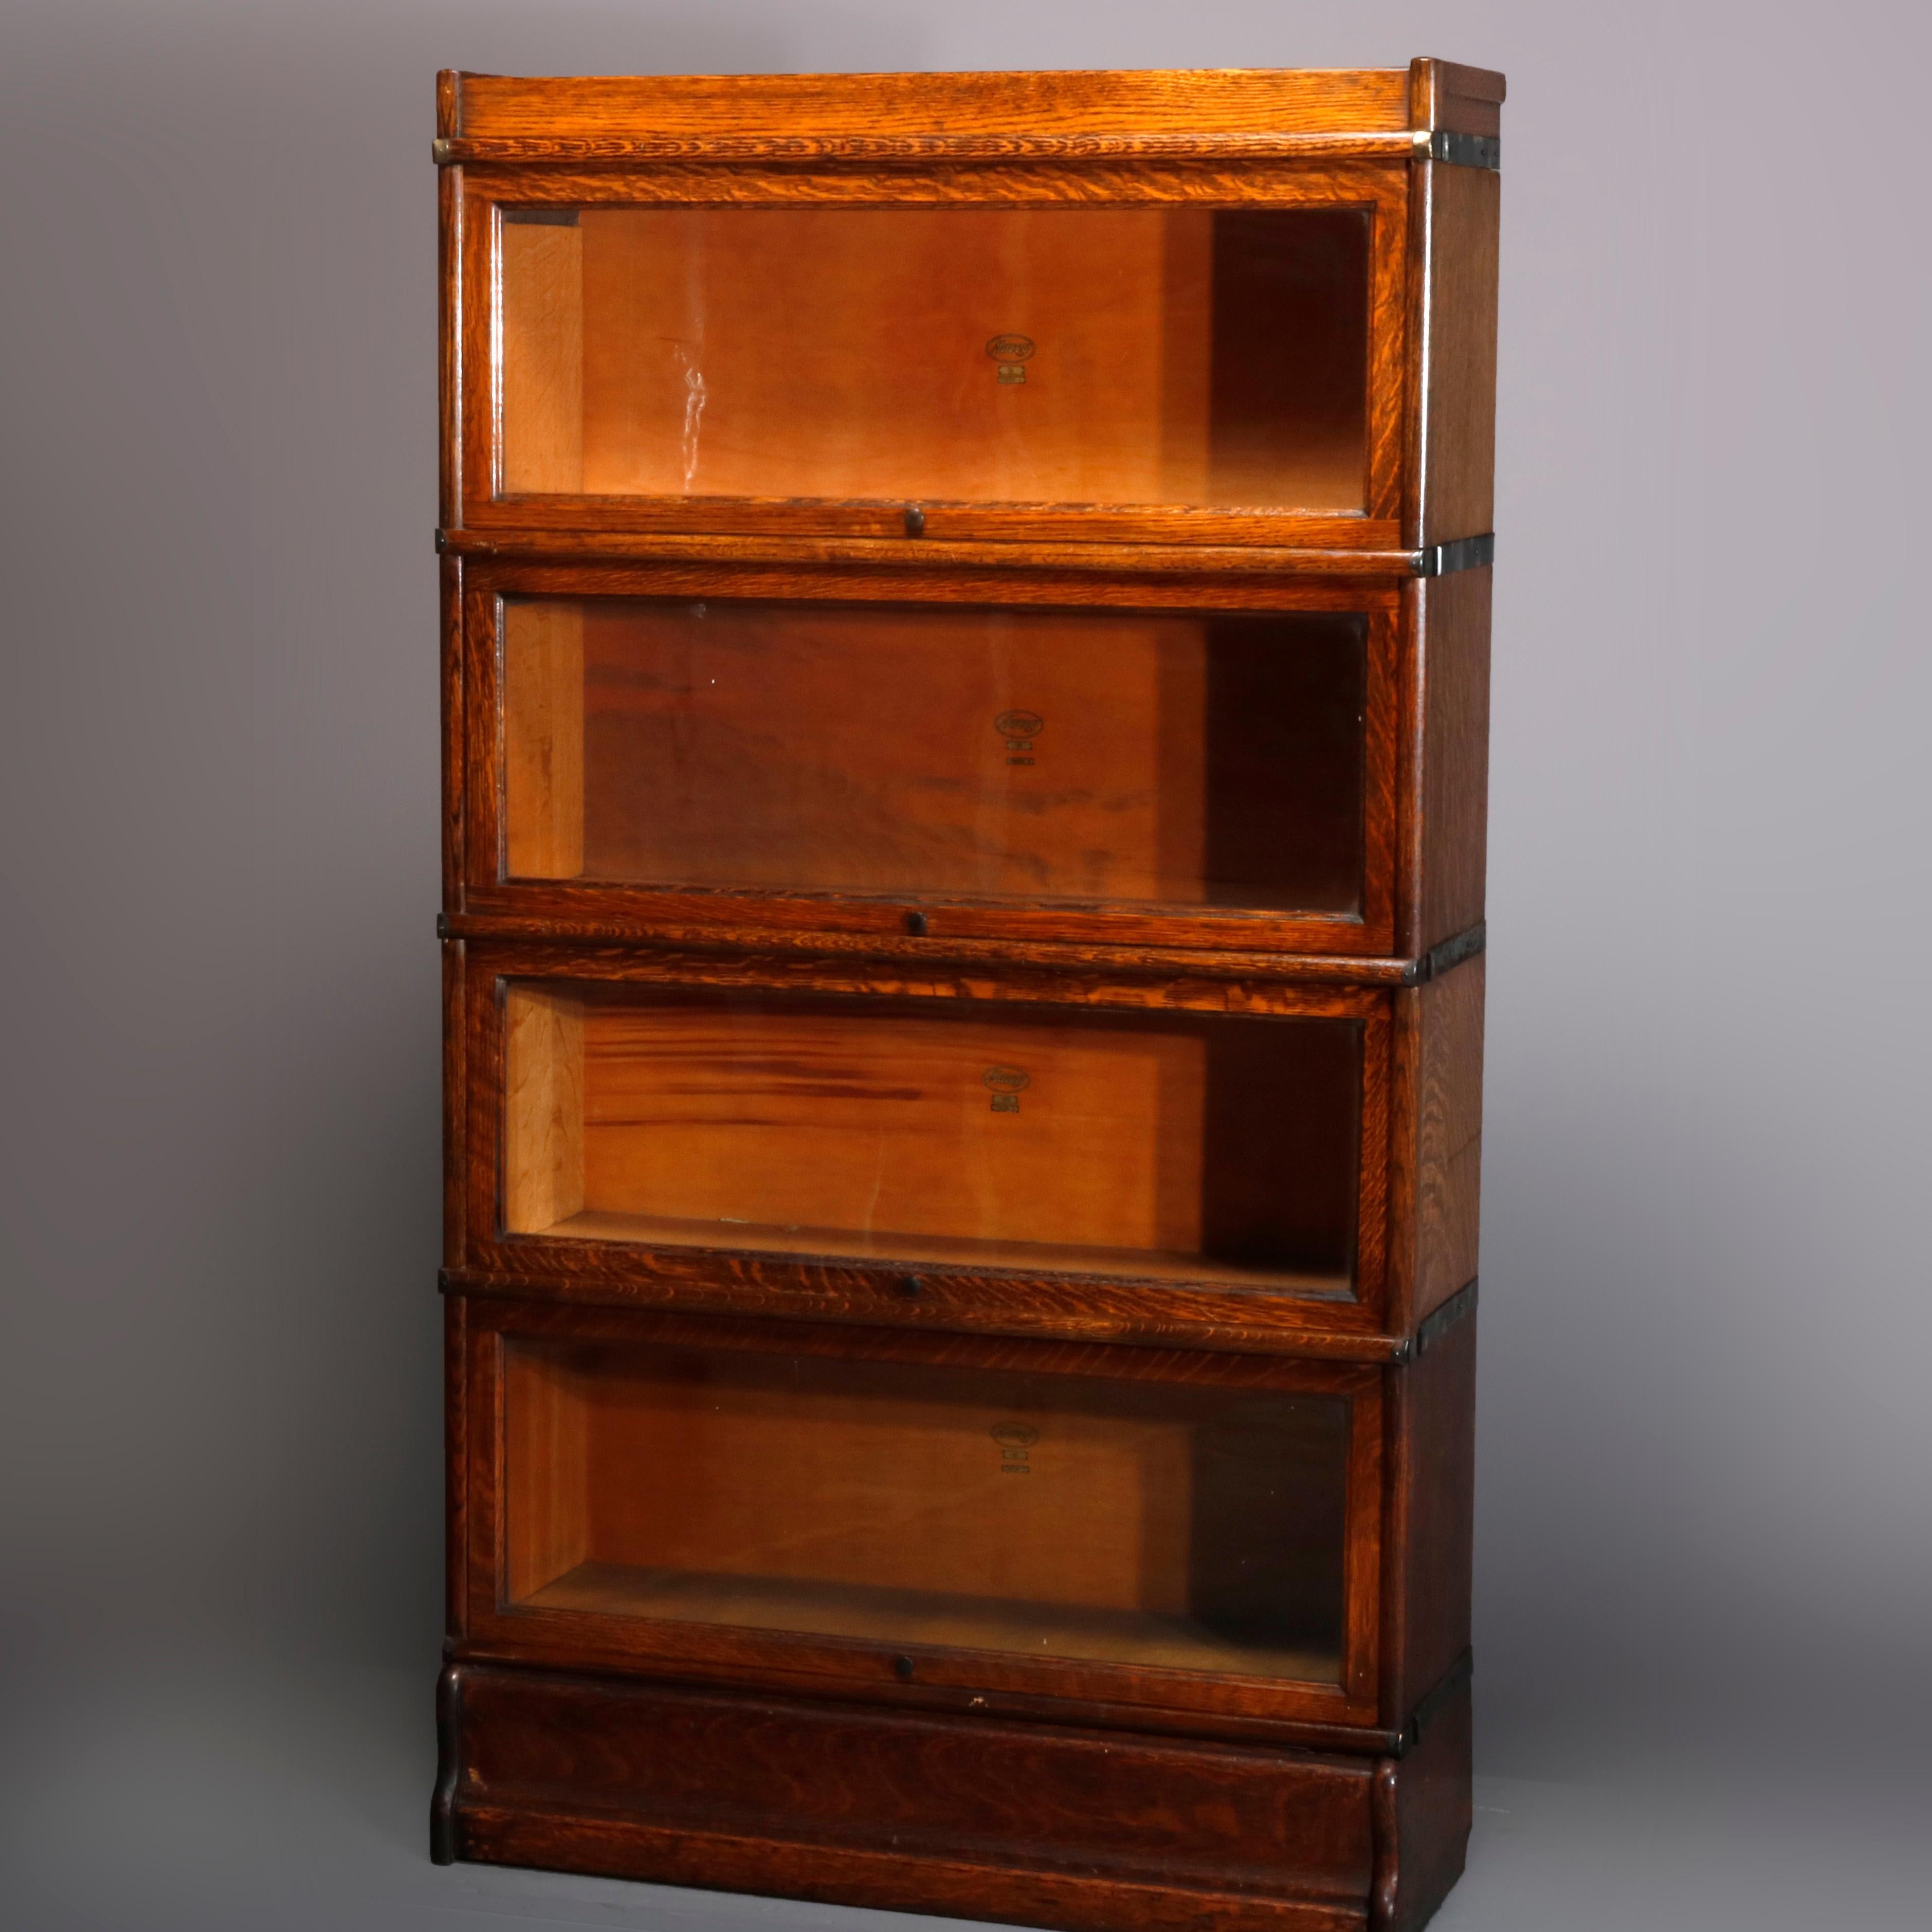 An antique Arts & Crafts Mission oak Barrister bookcase by Macey offers quarter sawn oak construction with four case stacks over base with lower drawer, original maker labels as photographed, circa 1910.

Measures- 61.5